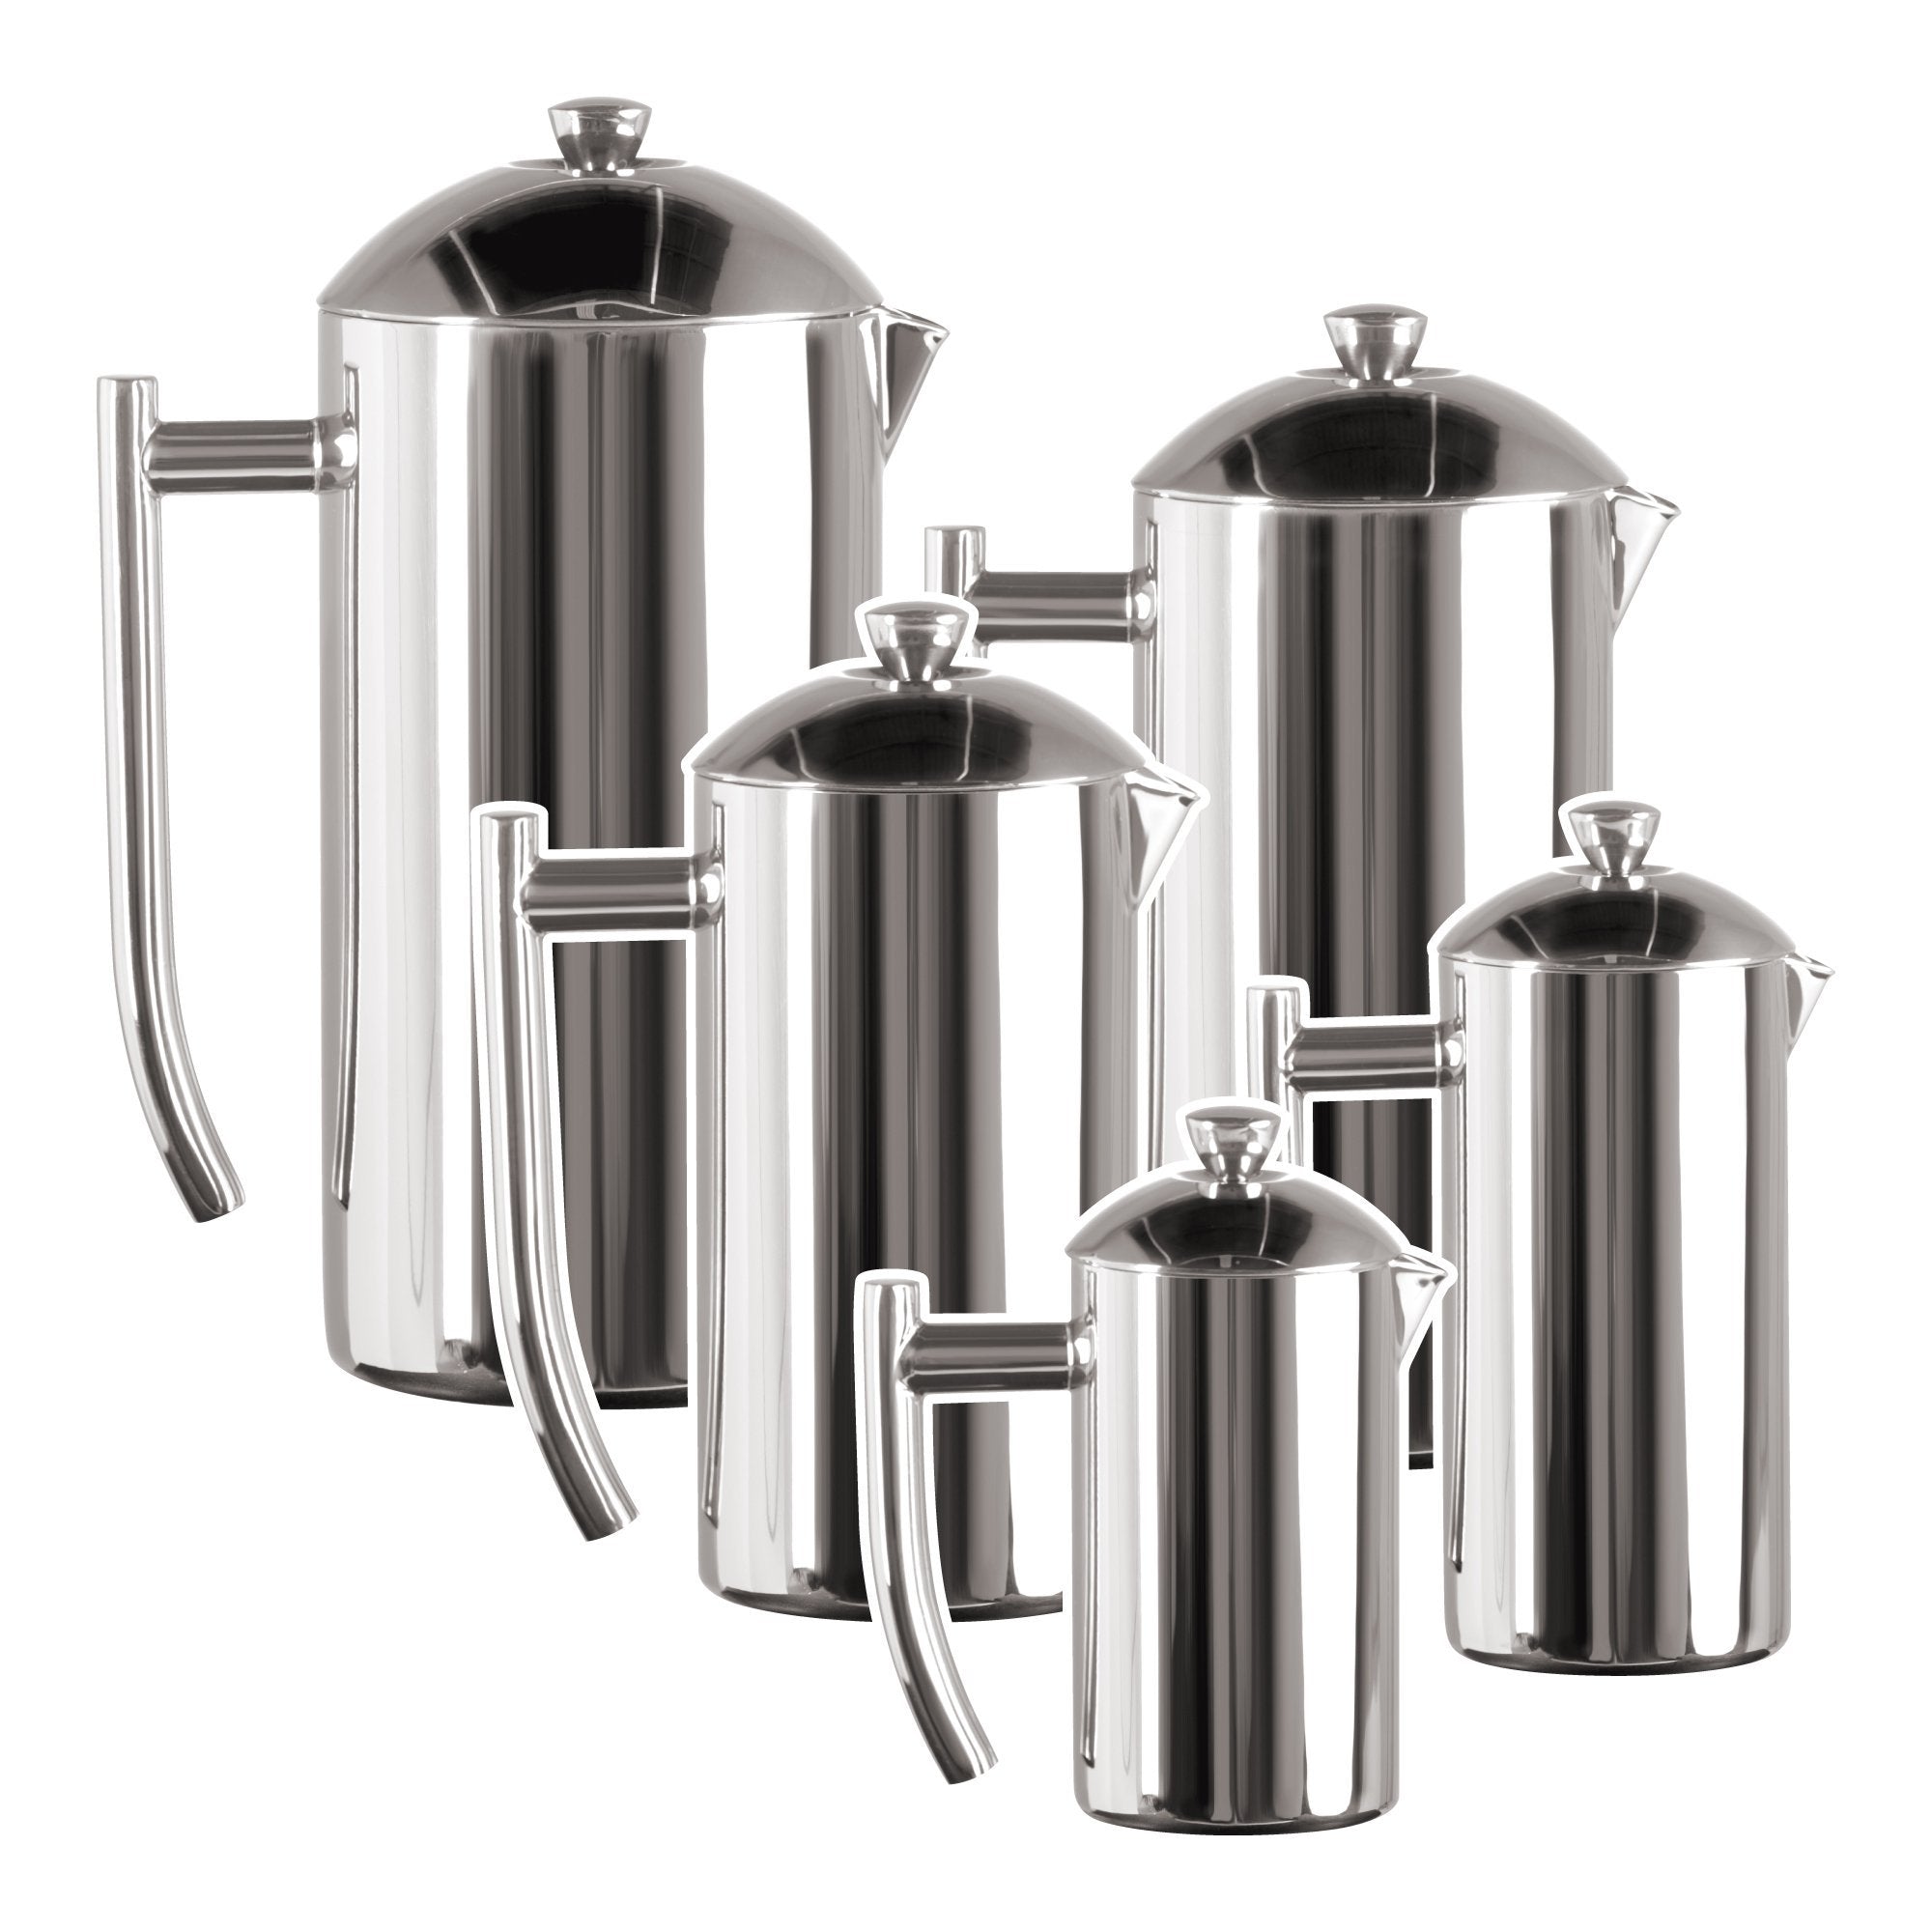 Frieling French Press: Premium Double Wall Stainless Steel